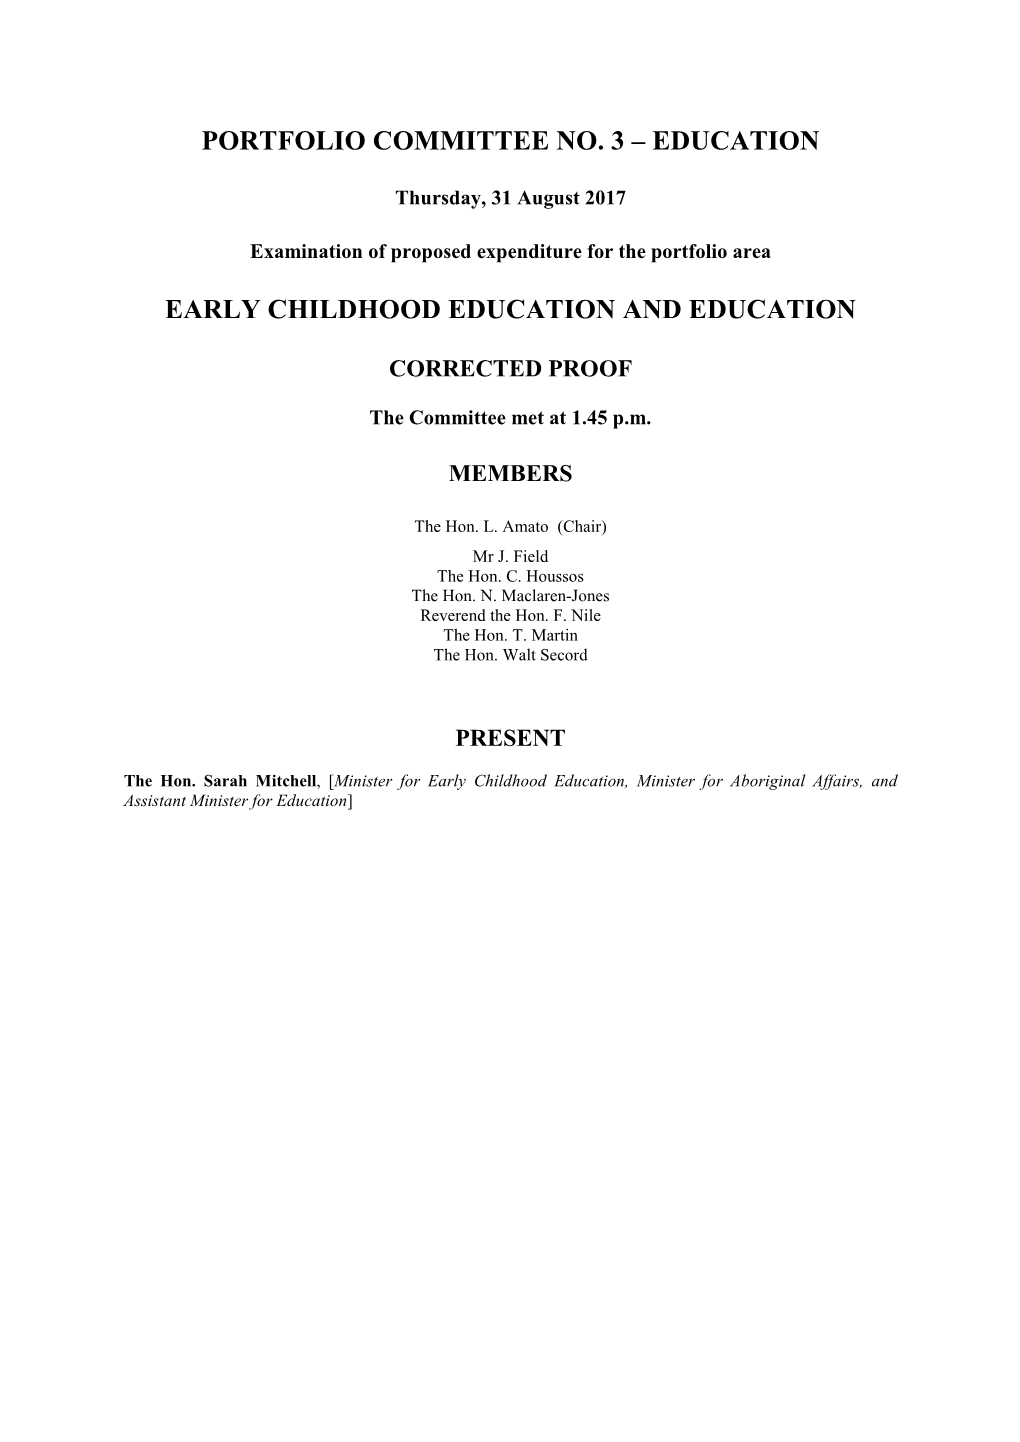 Portfolio Committee No. 3 – Education Early Childhood